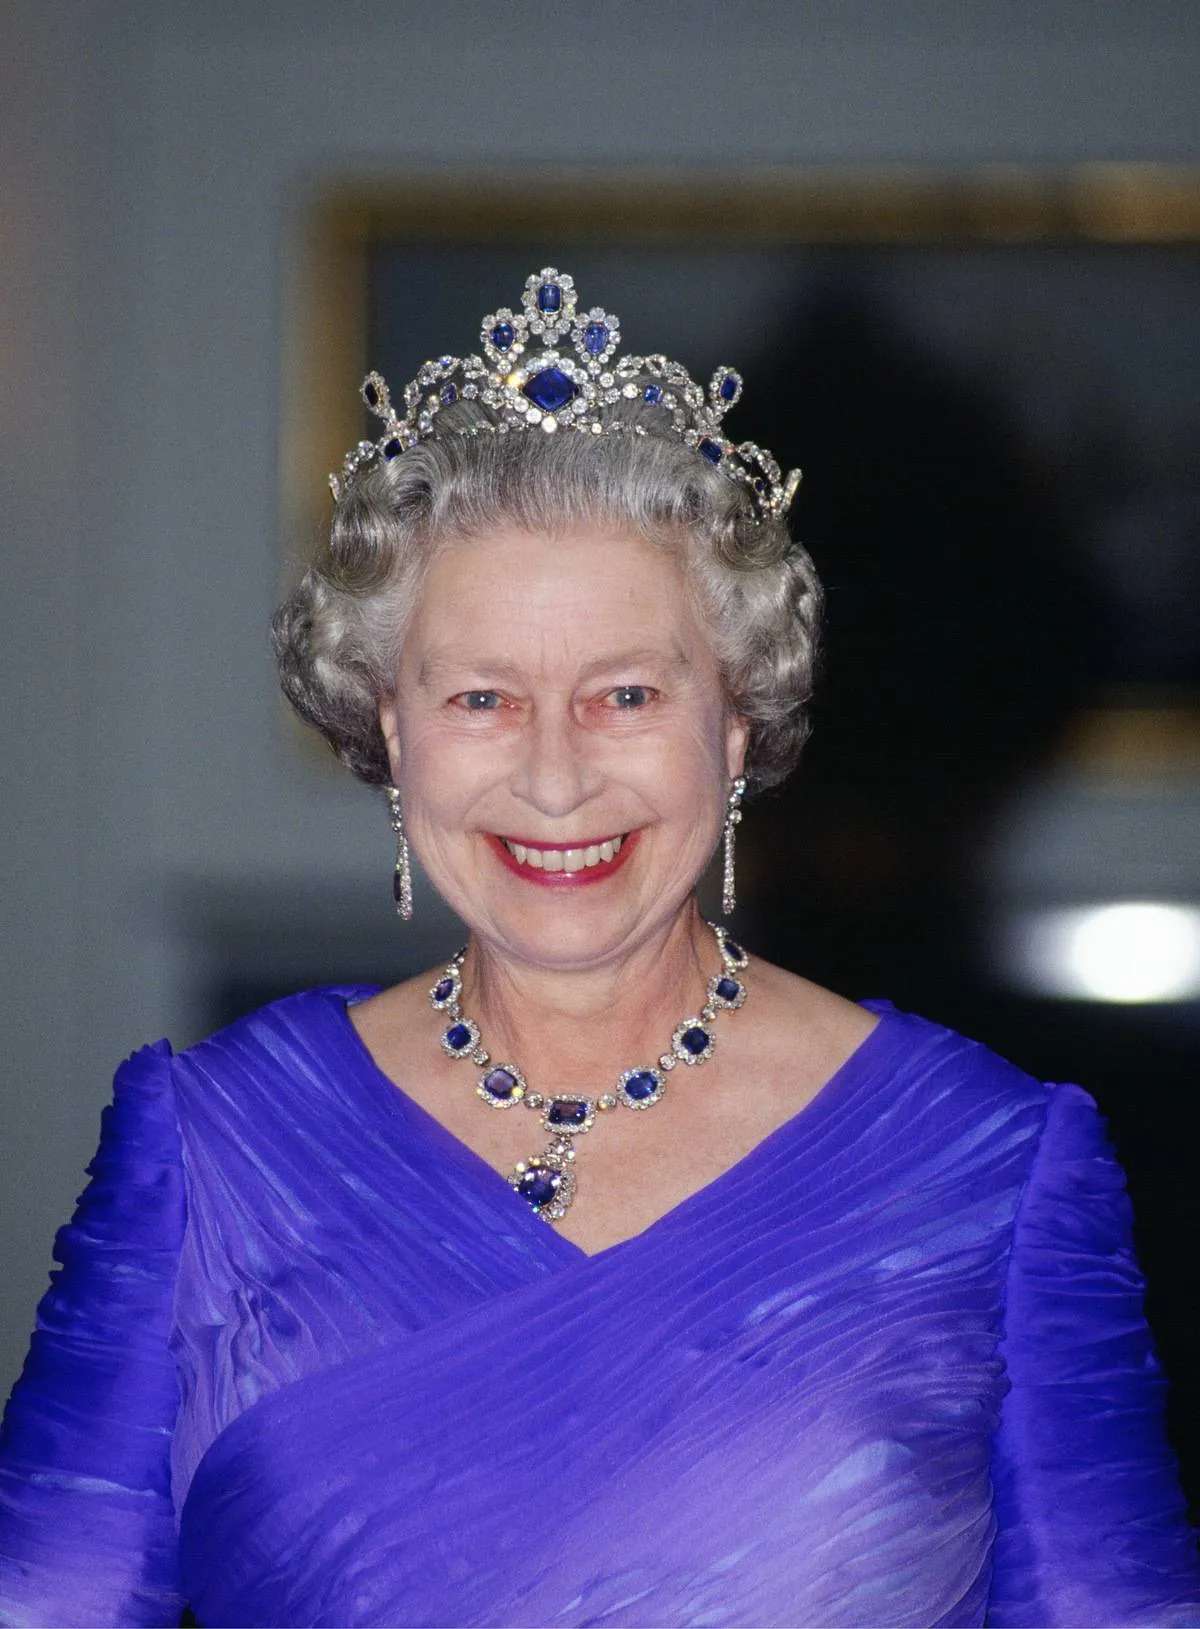 <p>Queen Elizabeth II's father, King George VI, presented her with some gorgeous jewelry when she married Prince Philip in 1947. It's called the <a href="https://www.thecourtjeweller.com/2015/03/sundays-with-queen-george-vi-sapphires.html" rel="noopener noreferrer">George VI Victorian Suite</a>, which originally consisted of a necklace with sparkling diamonds surrounding deep blue sapphires, as well as matching earrings.</p> <p>The Queen later had a matching tiara and bracelet made to accompany the necklace and earrings. The tiara was crafted from a necklace that originally belonged to Princess Louise of Belgium. </p>